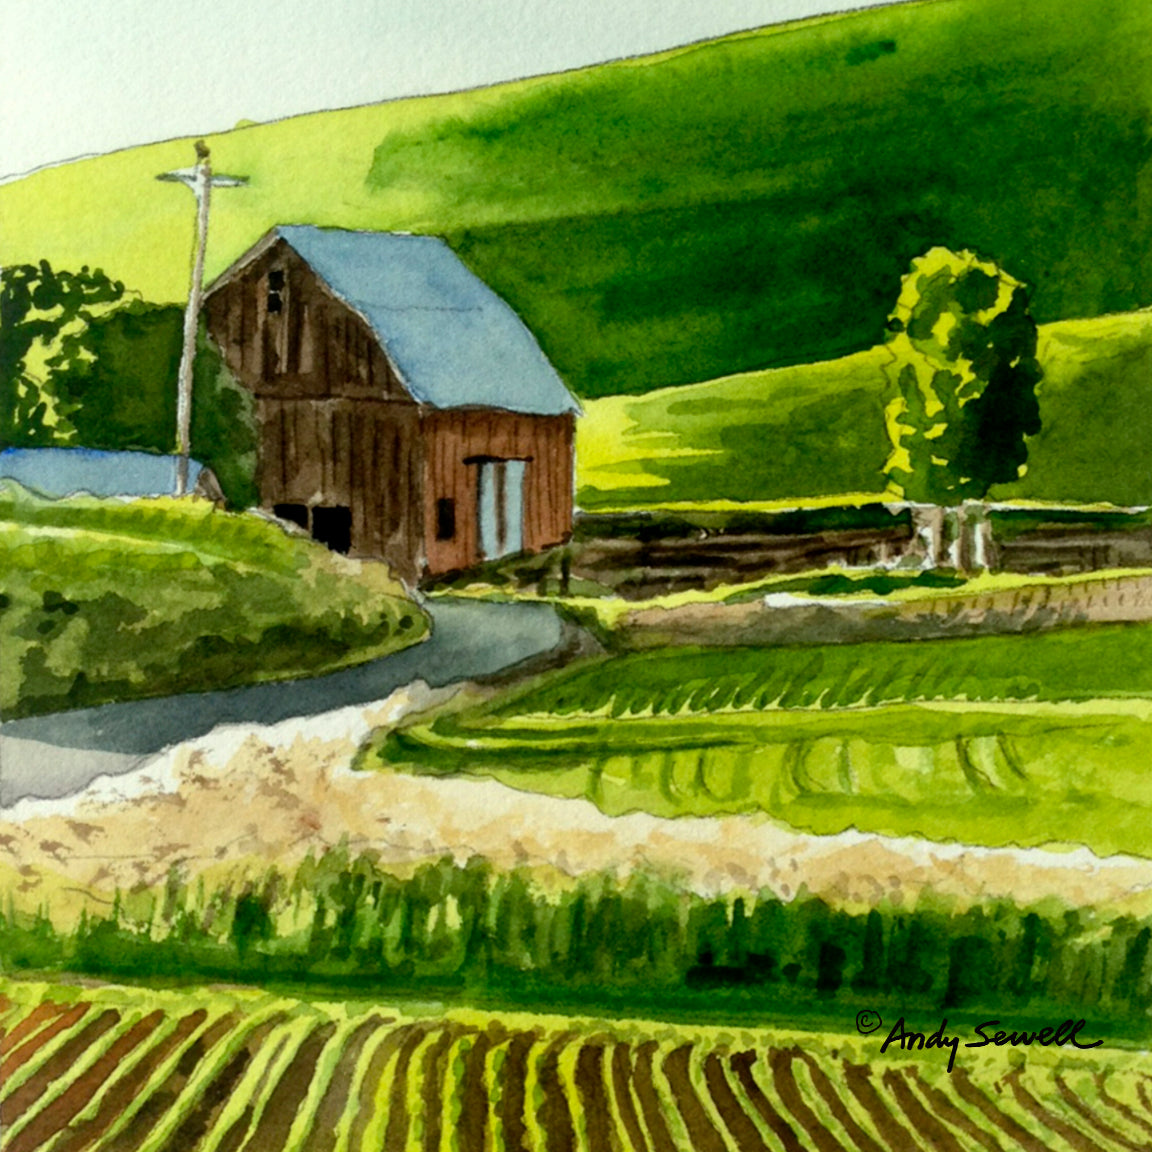 "Spring Country Lines " - 6"x6" Original watercolor or signed edition giclee art print from an original watercolor